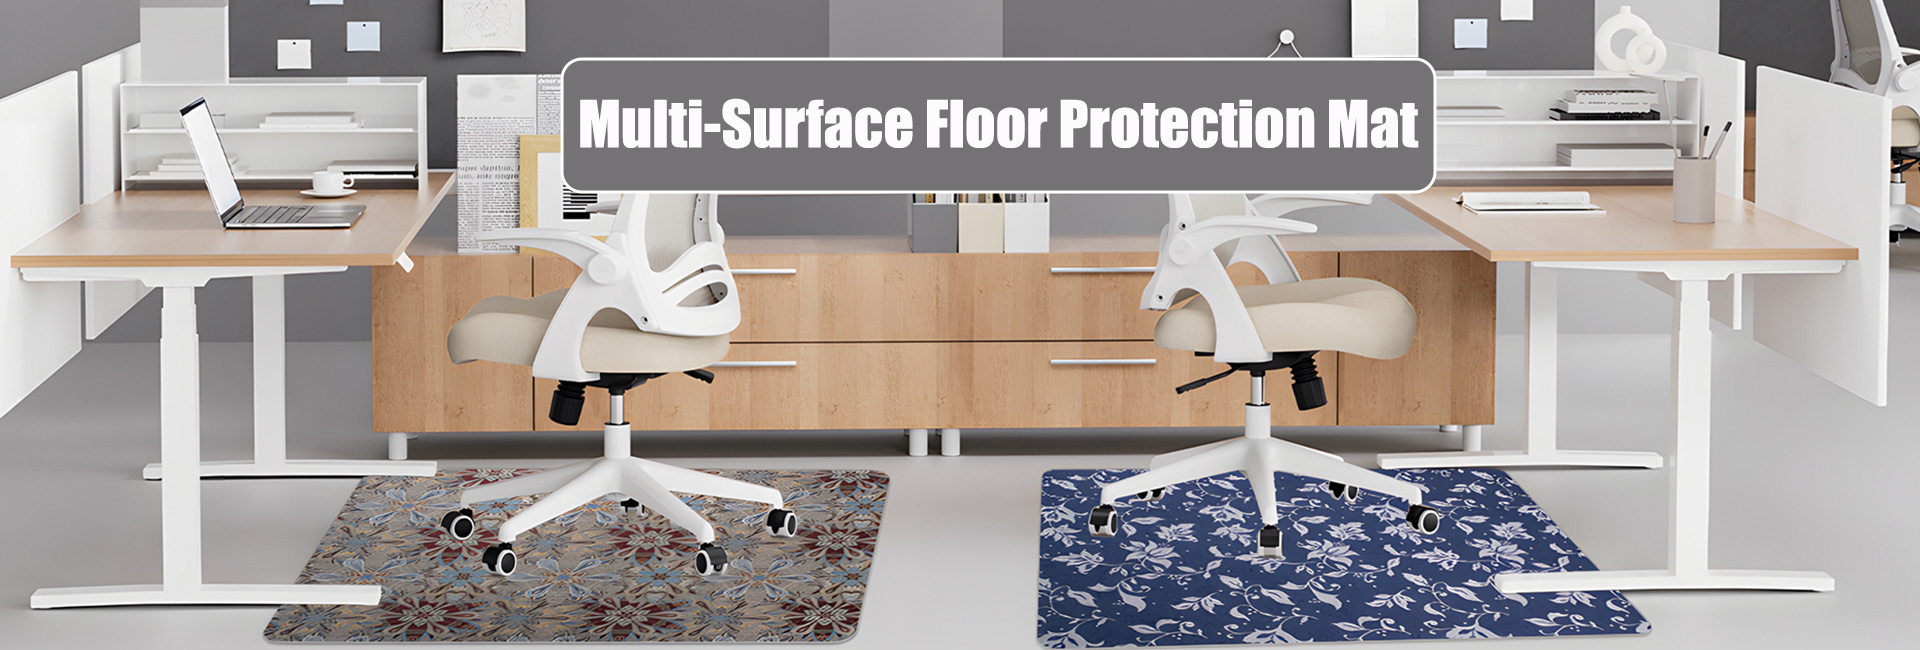 Multi-Surface Floor Protection Mat